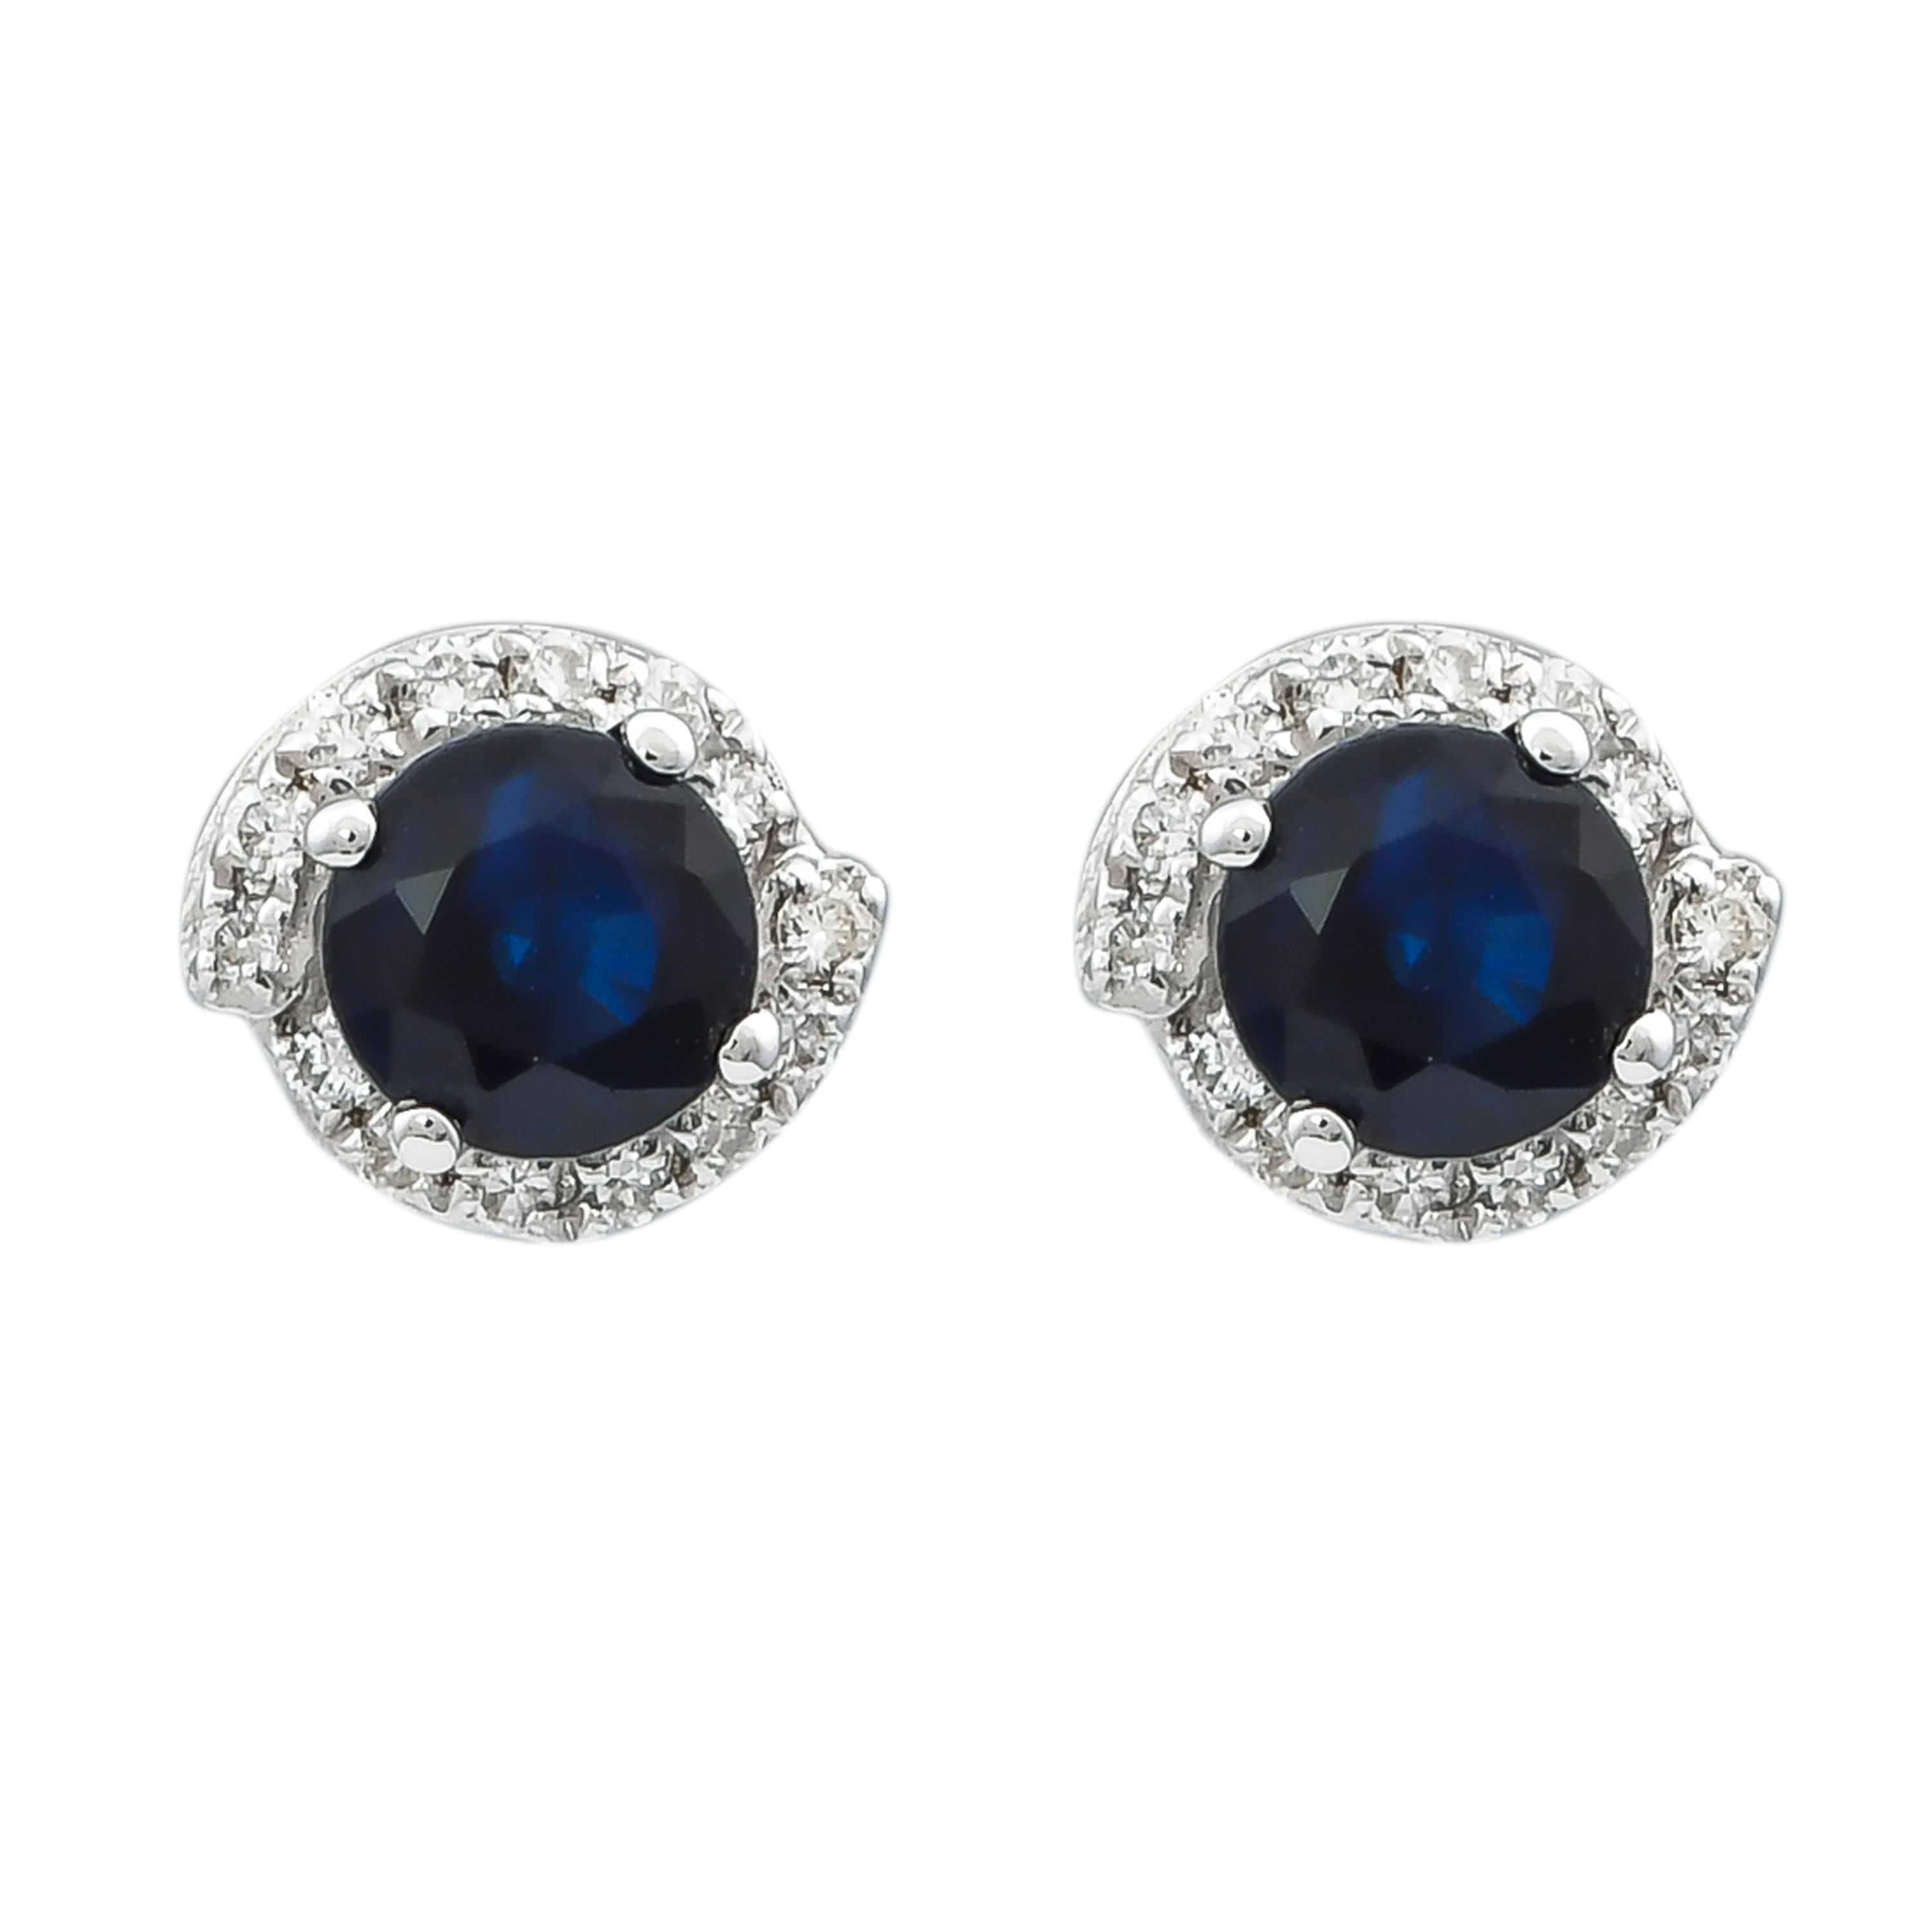 Round Cut 1.0 Carat Blue Sapphire and Diamond Earring in 18 Karat White Gold For Sale